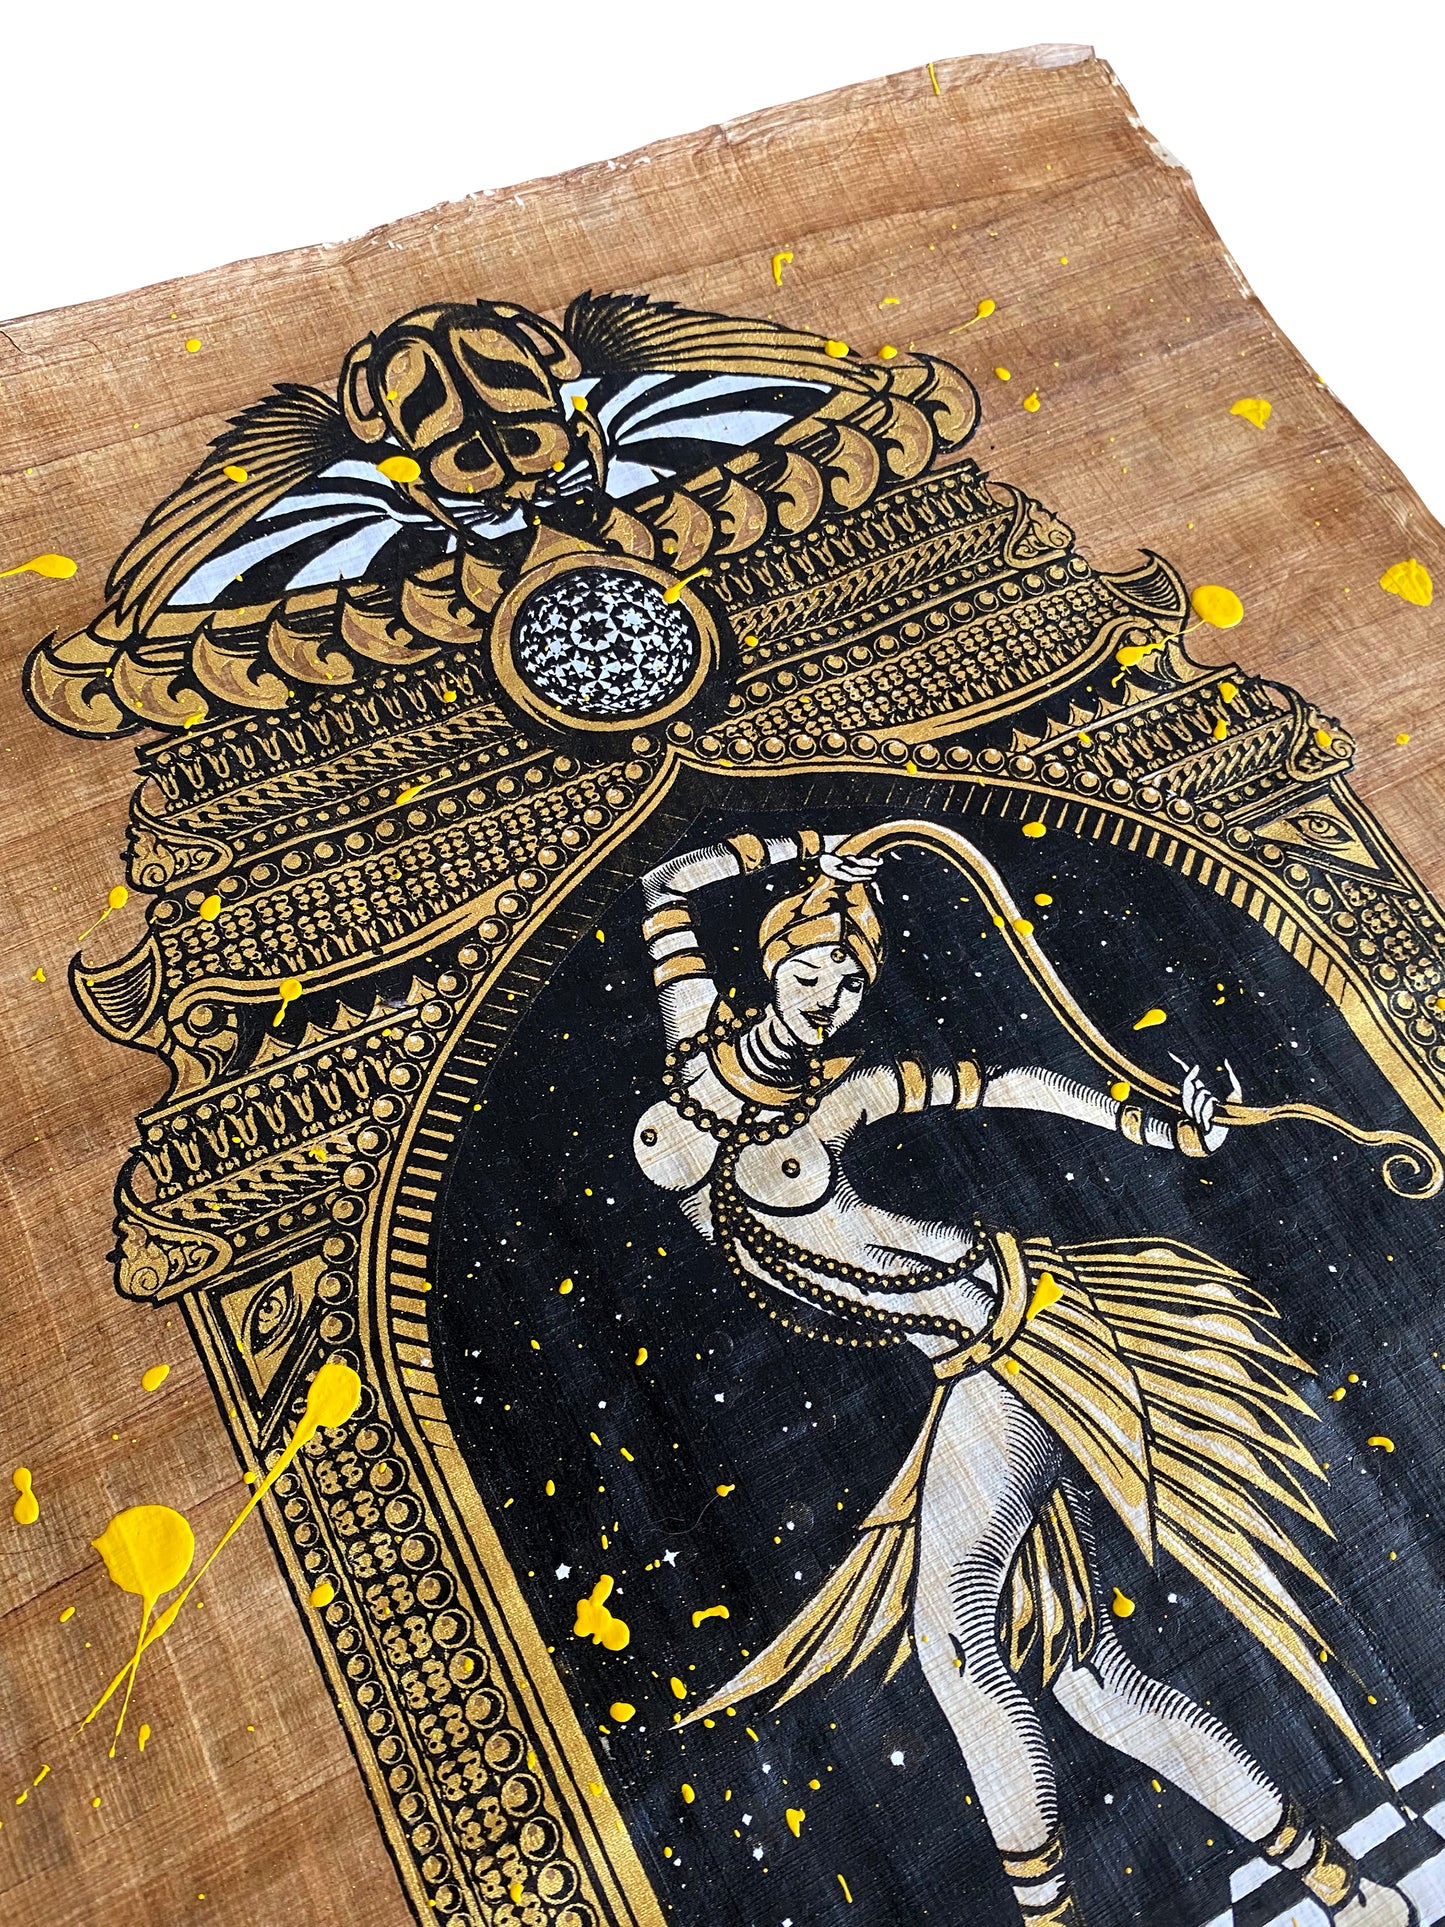 TEMPLE DANCER - Hand Embellished (Collector's Edition)